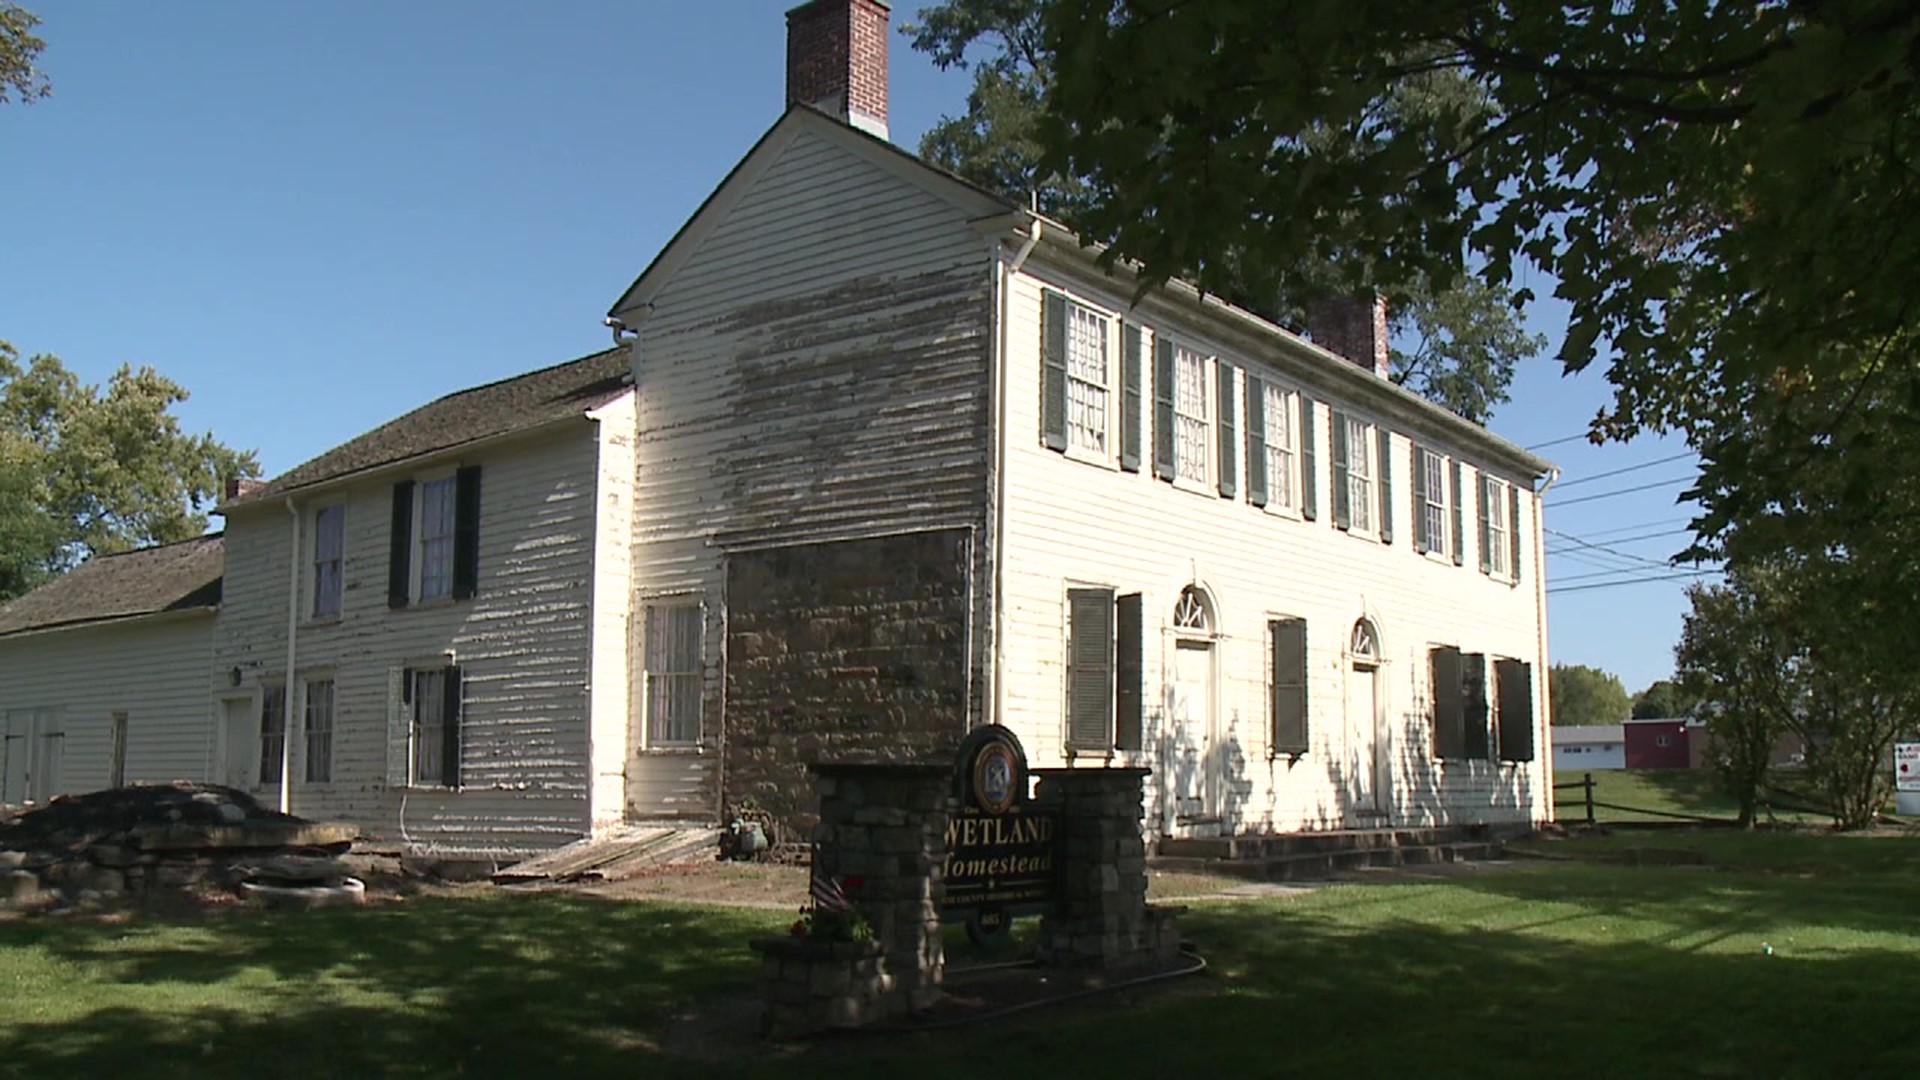 A house more than 200 years old and dedicated to preserving history is getting some work done to continue its mission.